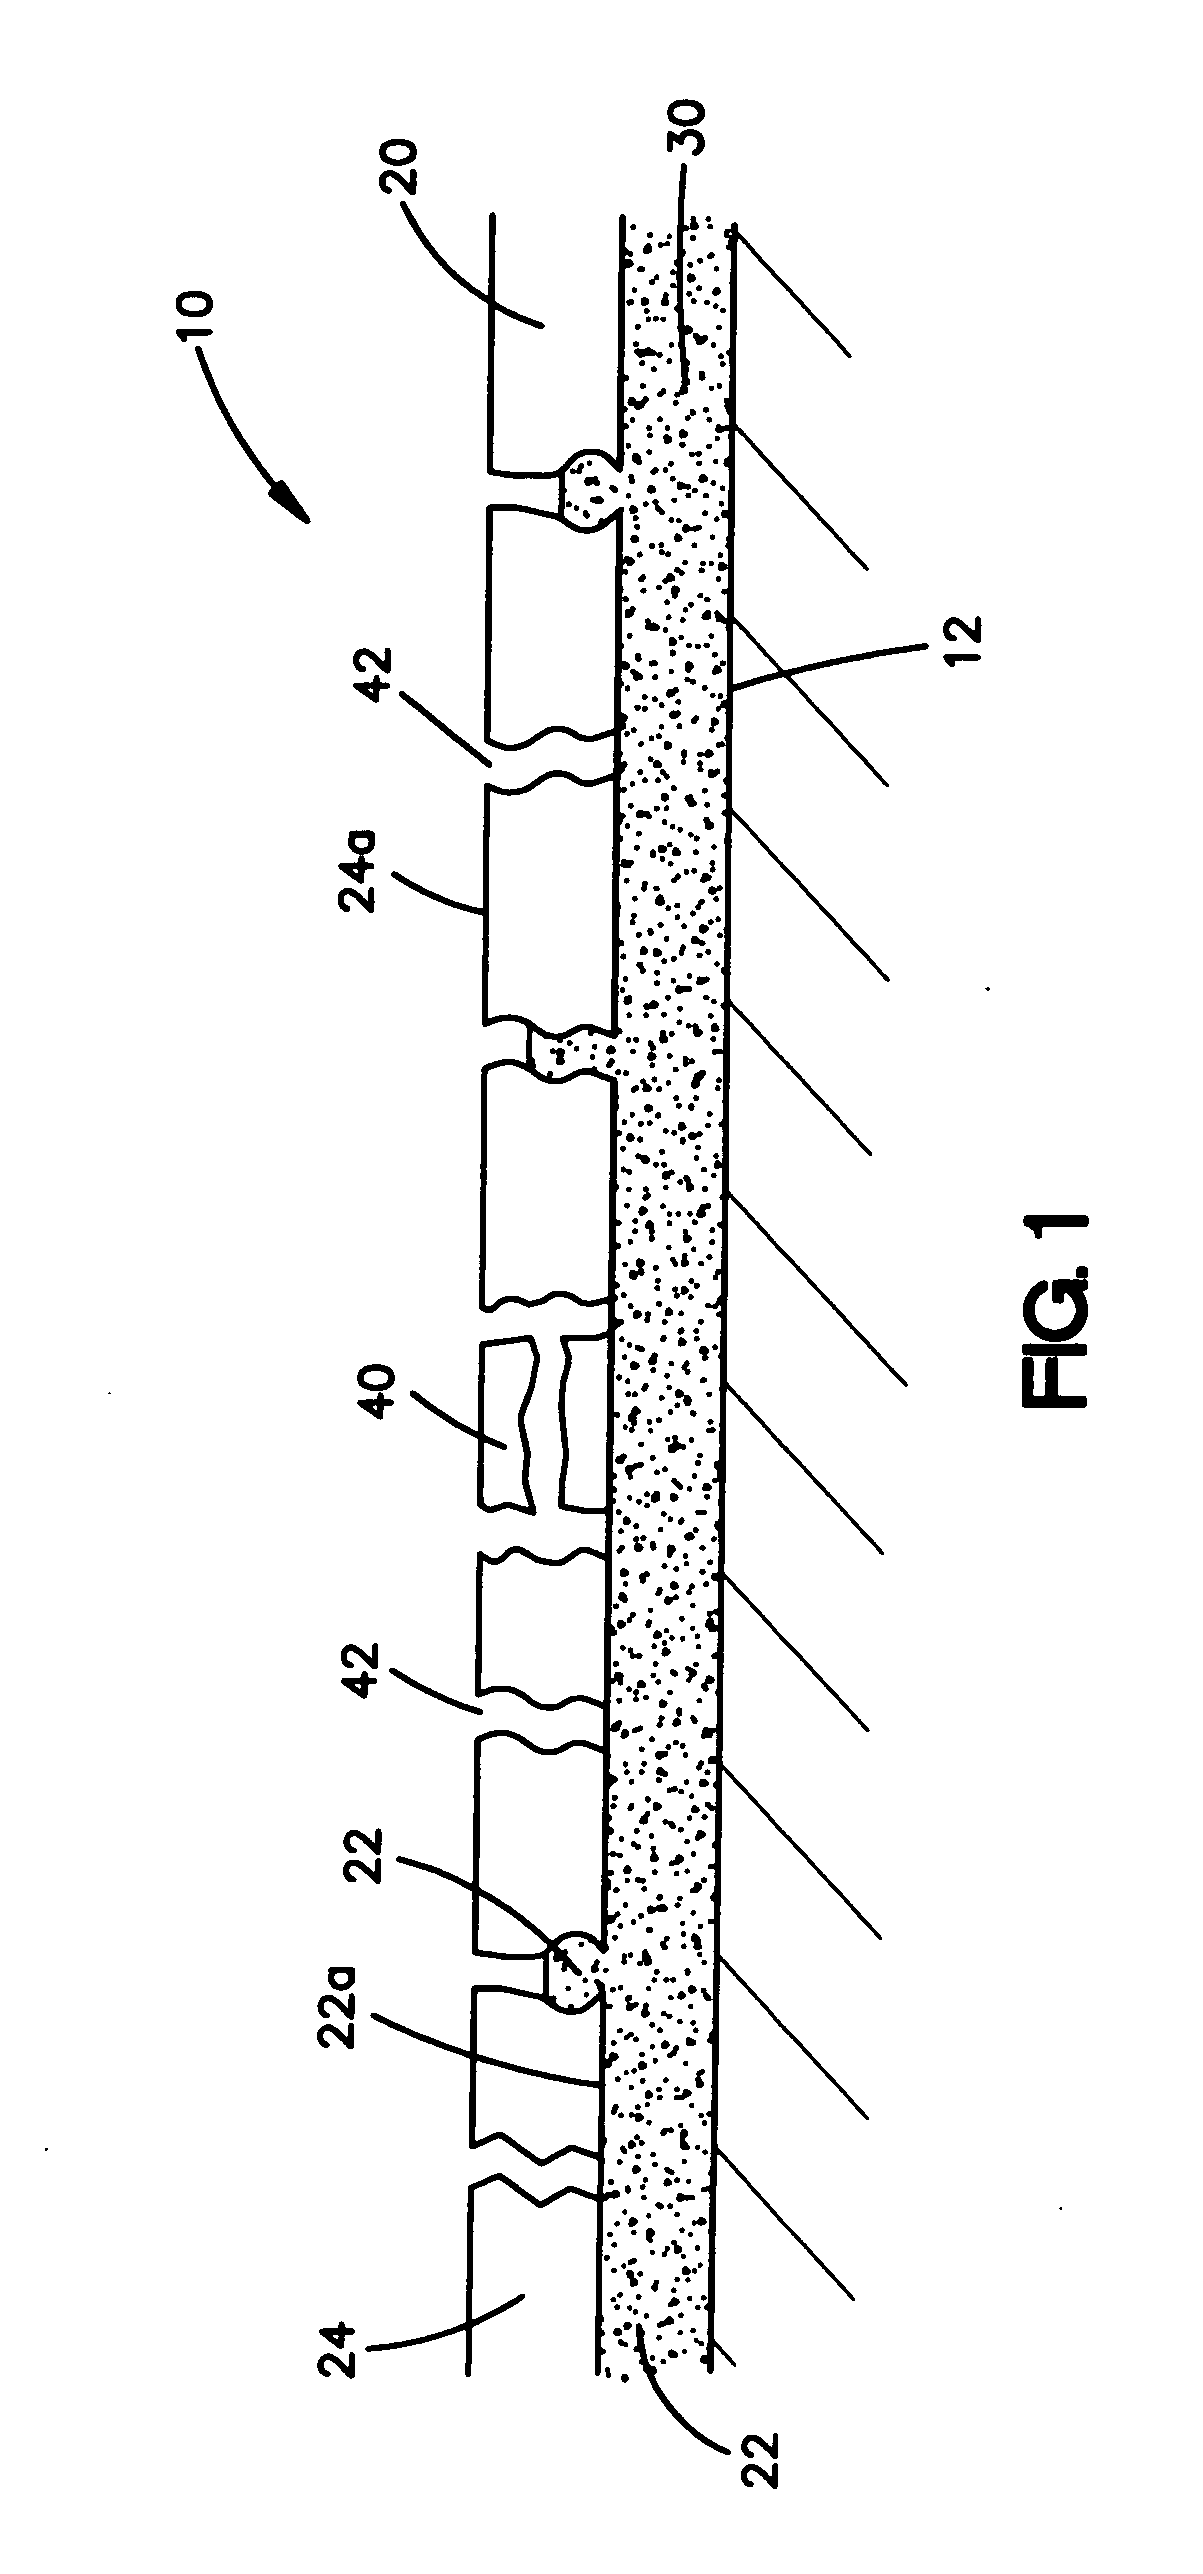 Coatings for medical devices comprising a therapeutic agent and a metallic material